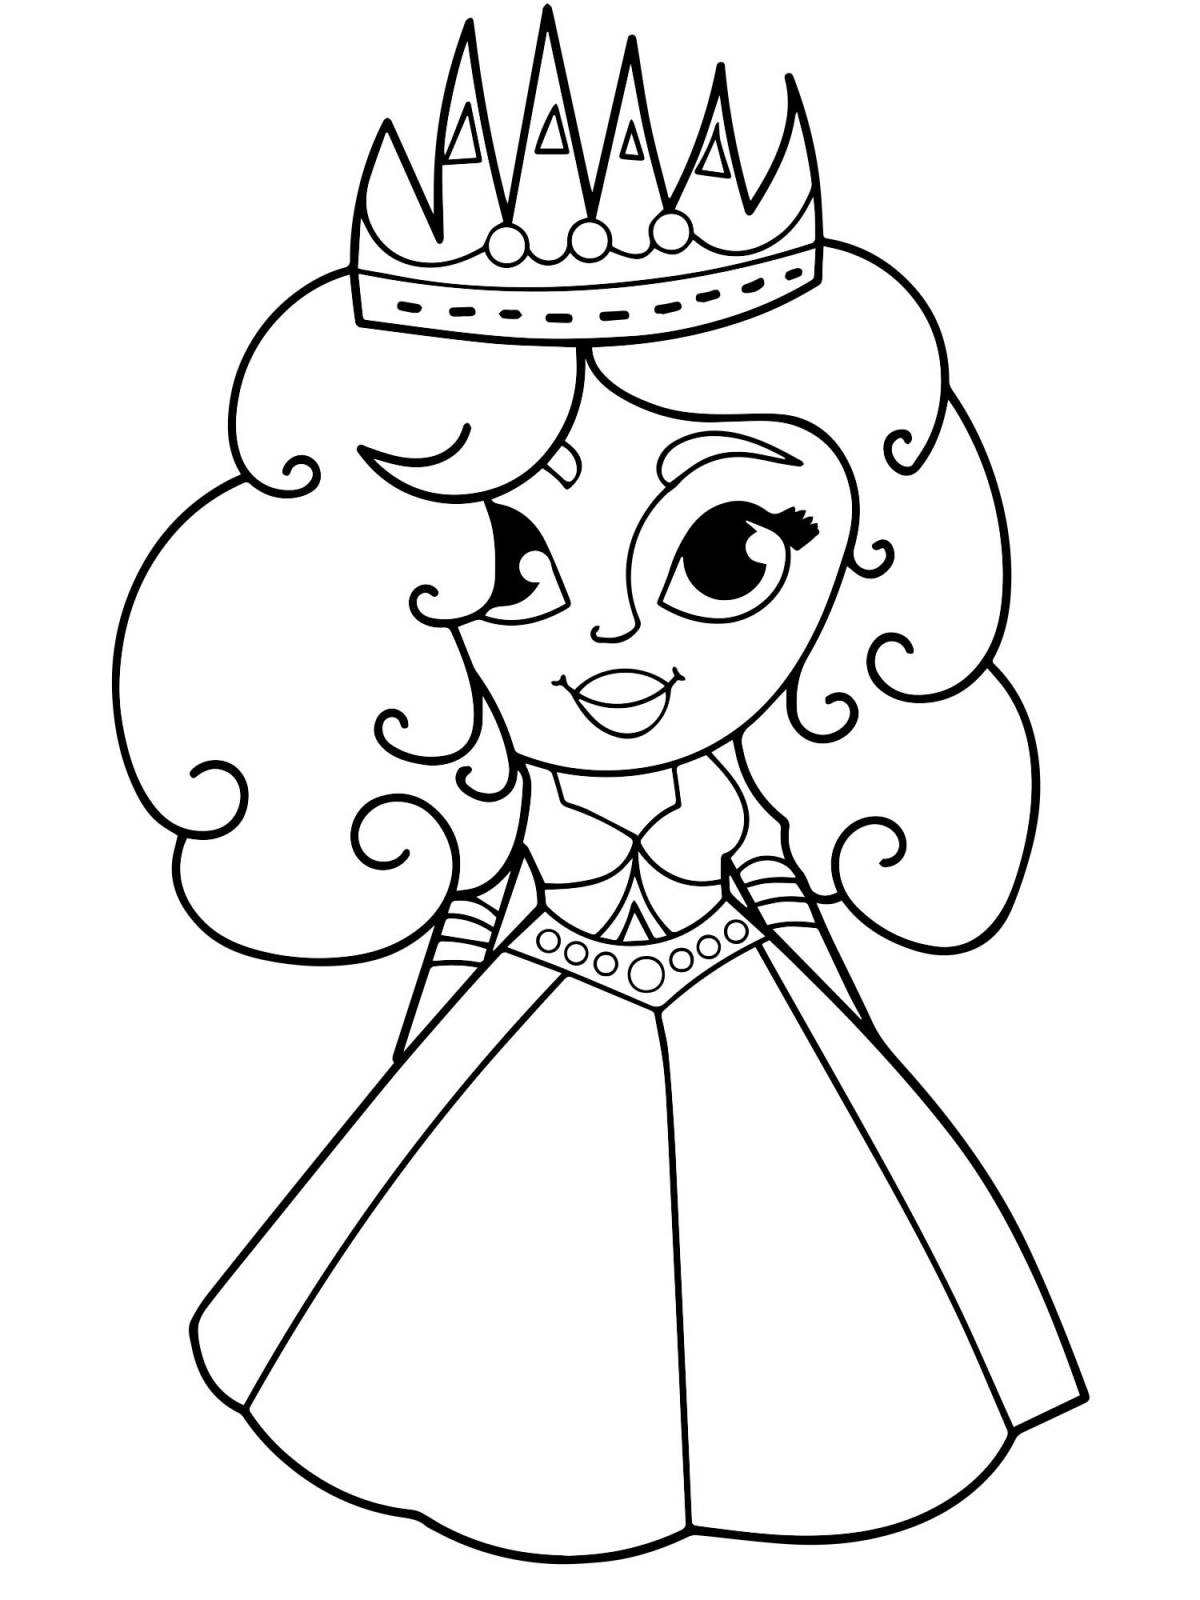 Adorable queen coloring book for kids